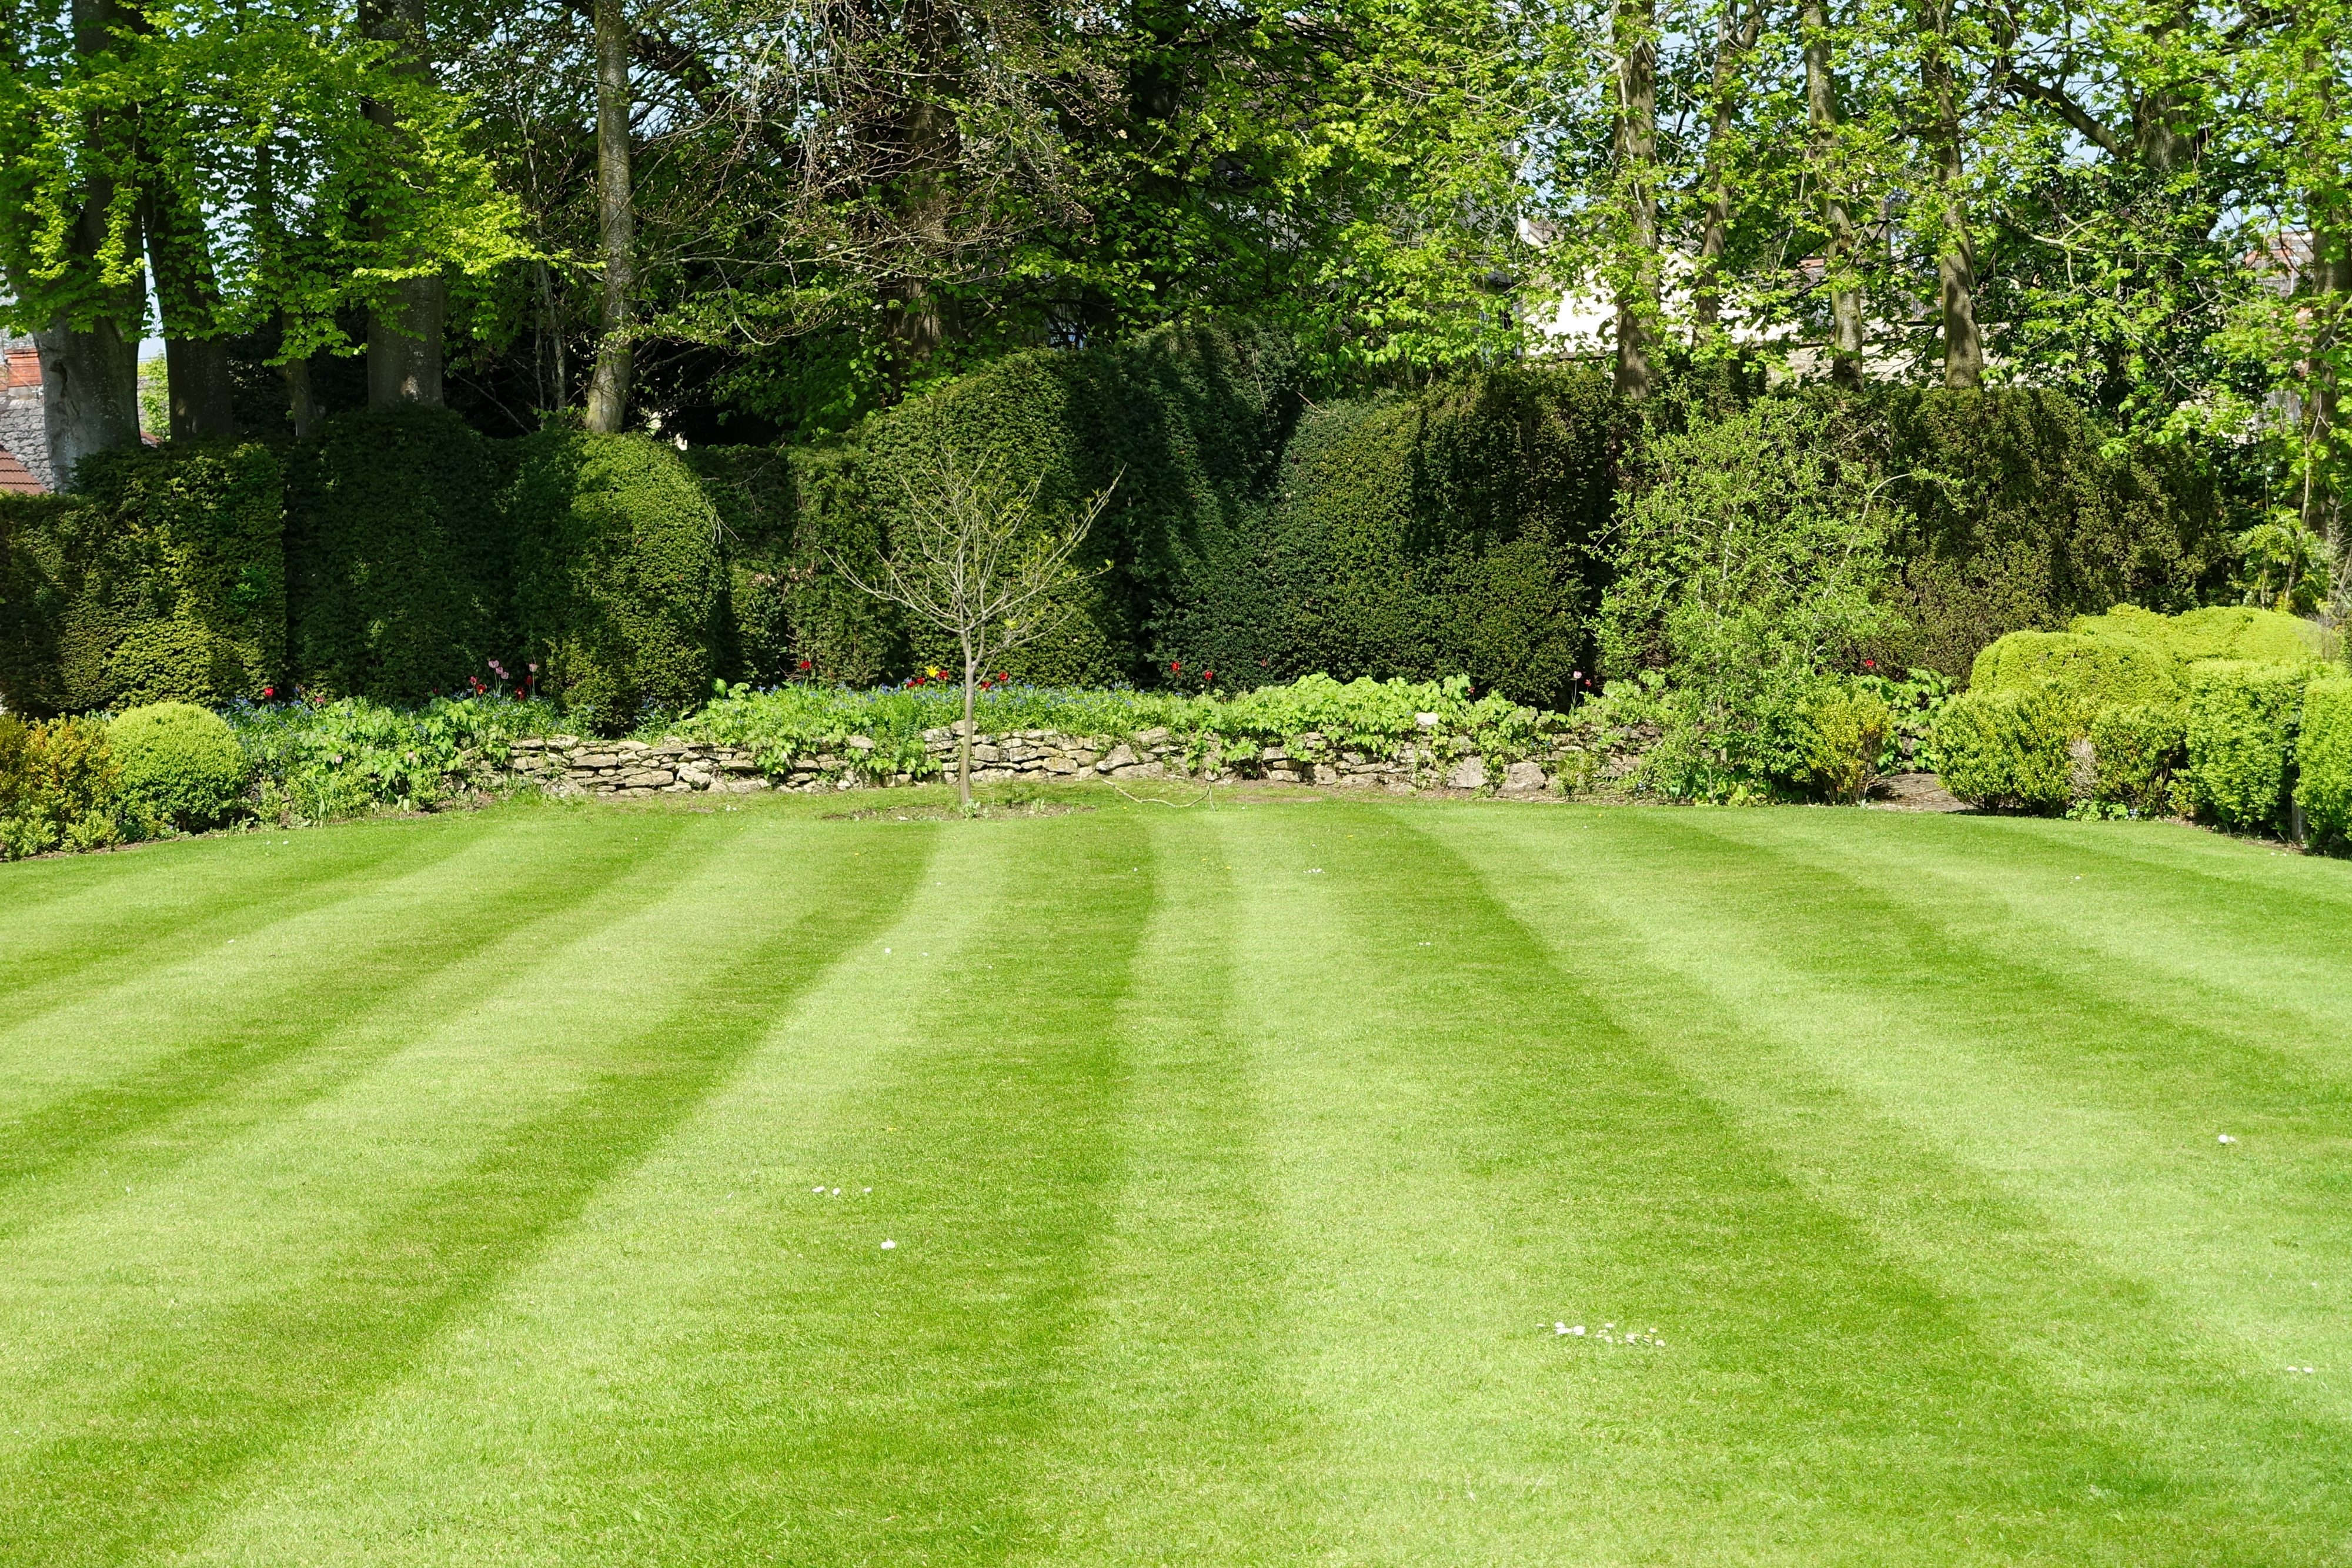 With these tips and tricks, your lawn should look this good in no time